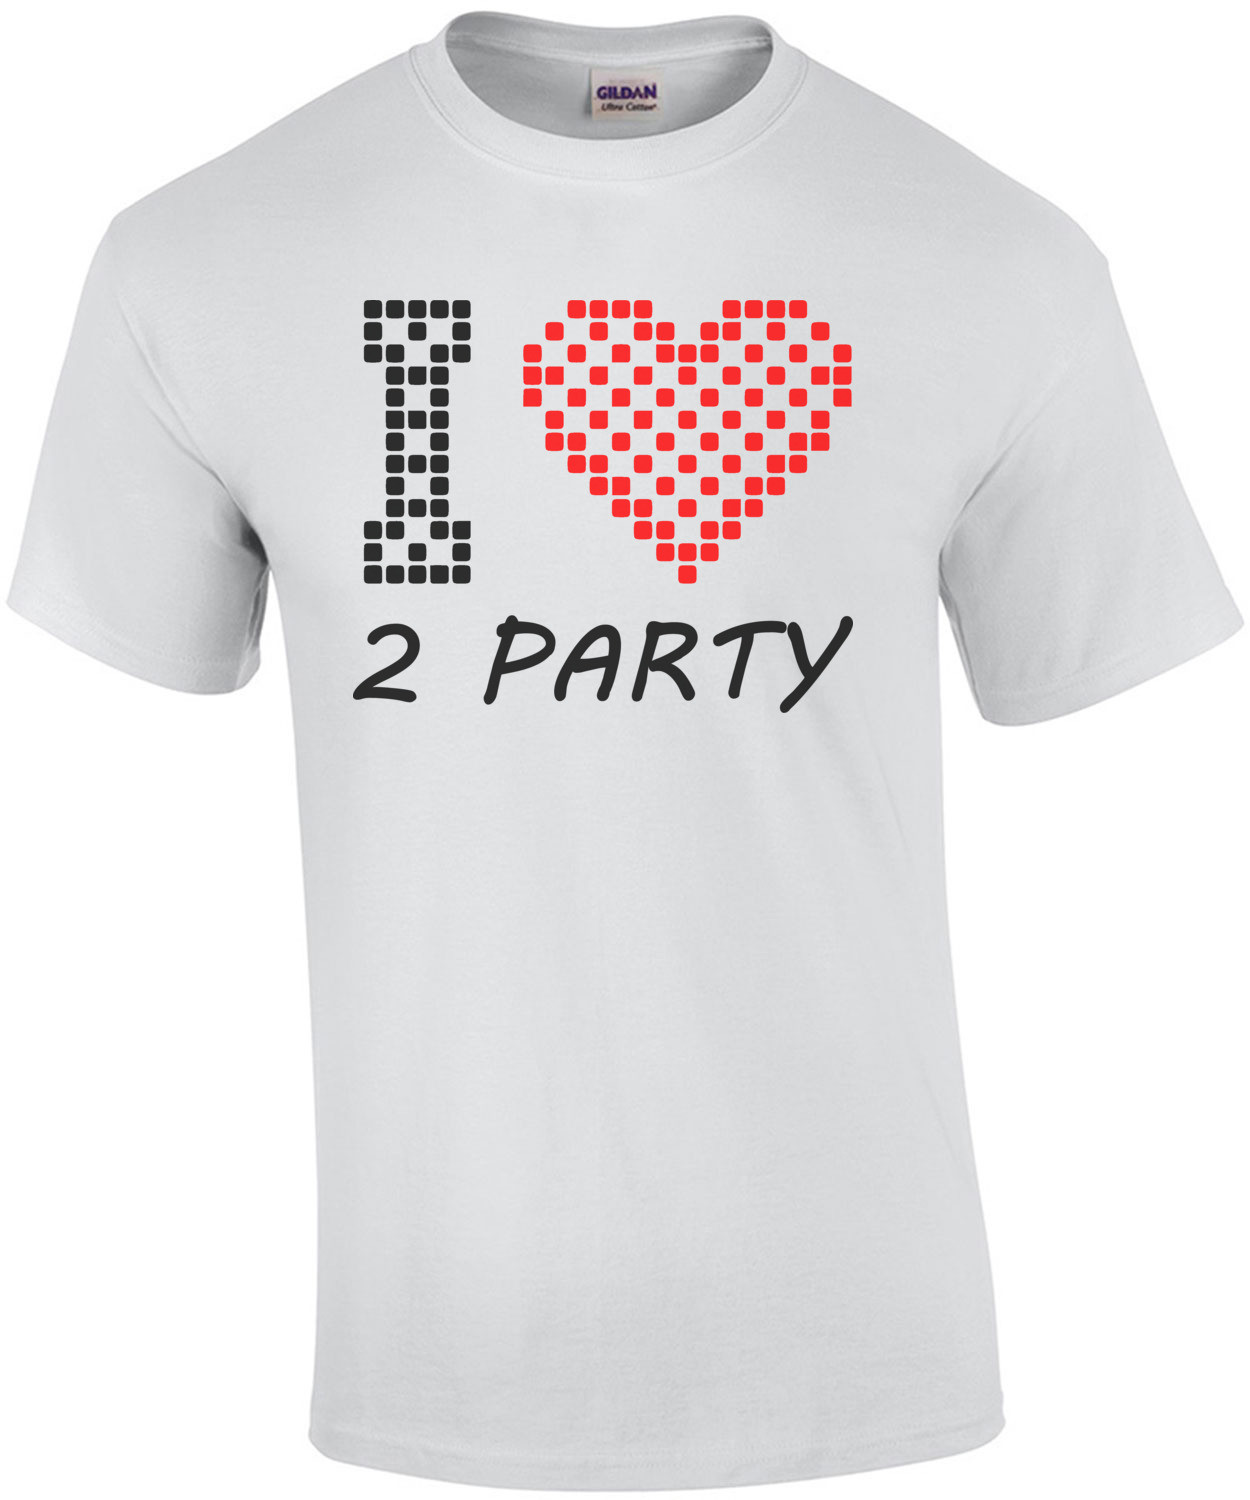 I Love 2 Party - Cool T-Shirt